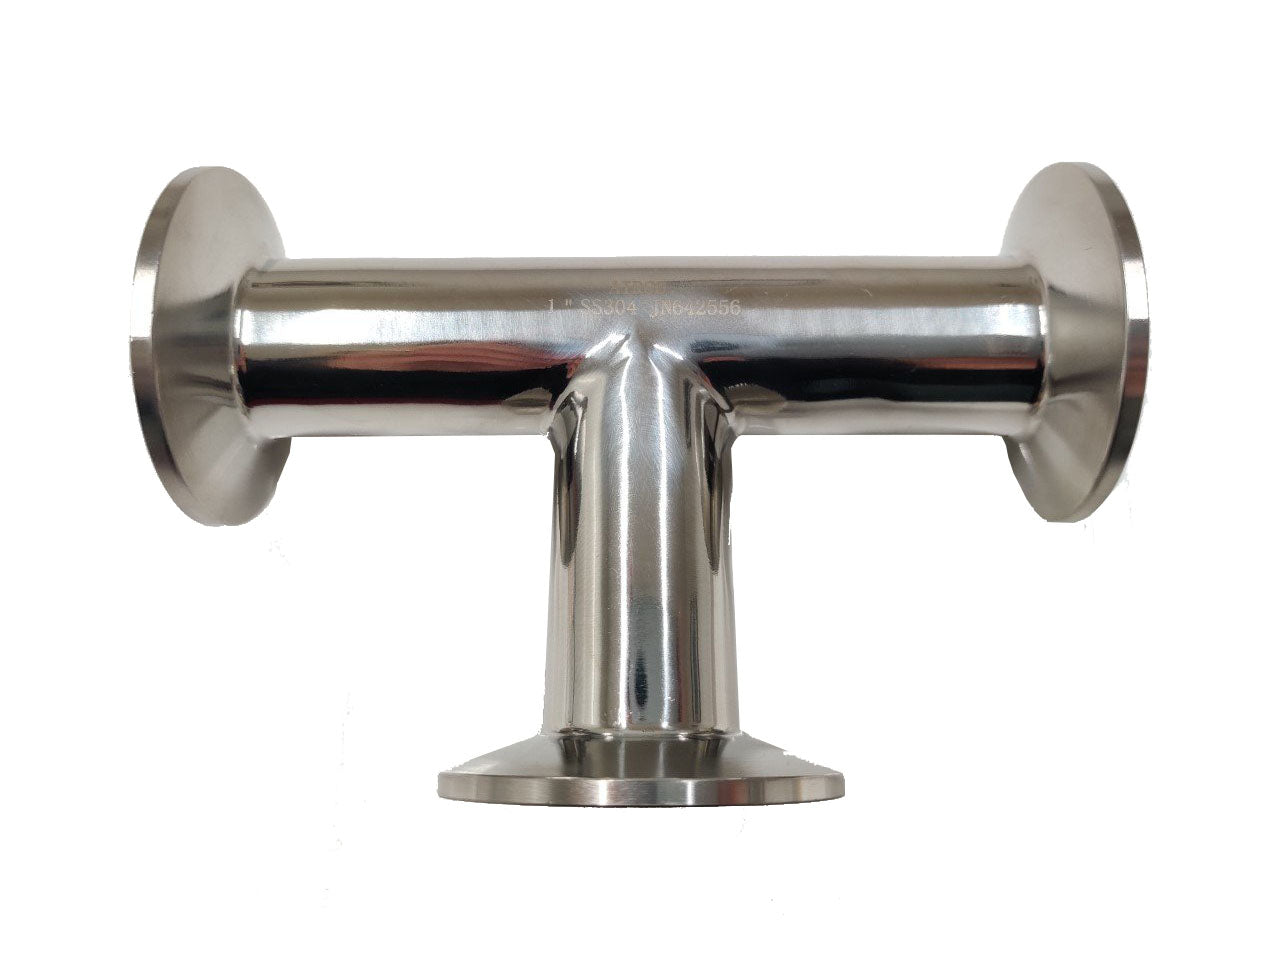 3A Tri Clamped Equal Tee - AircoProducts